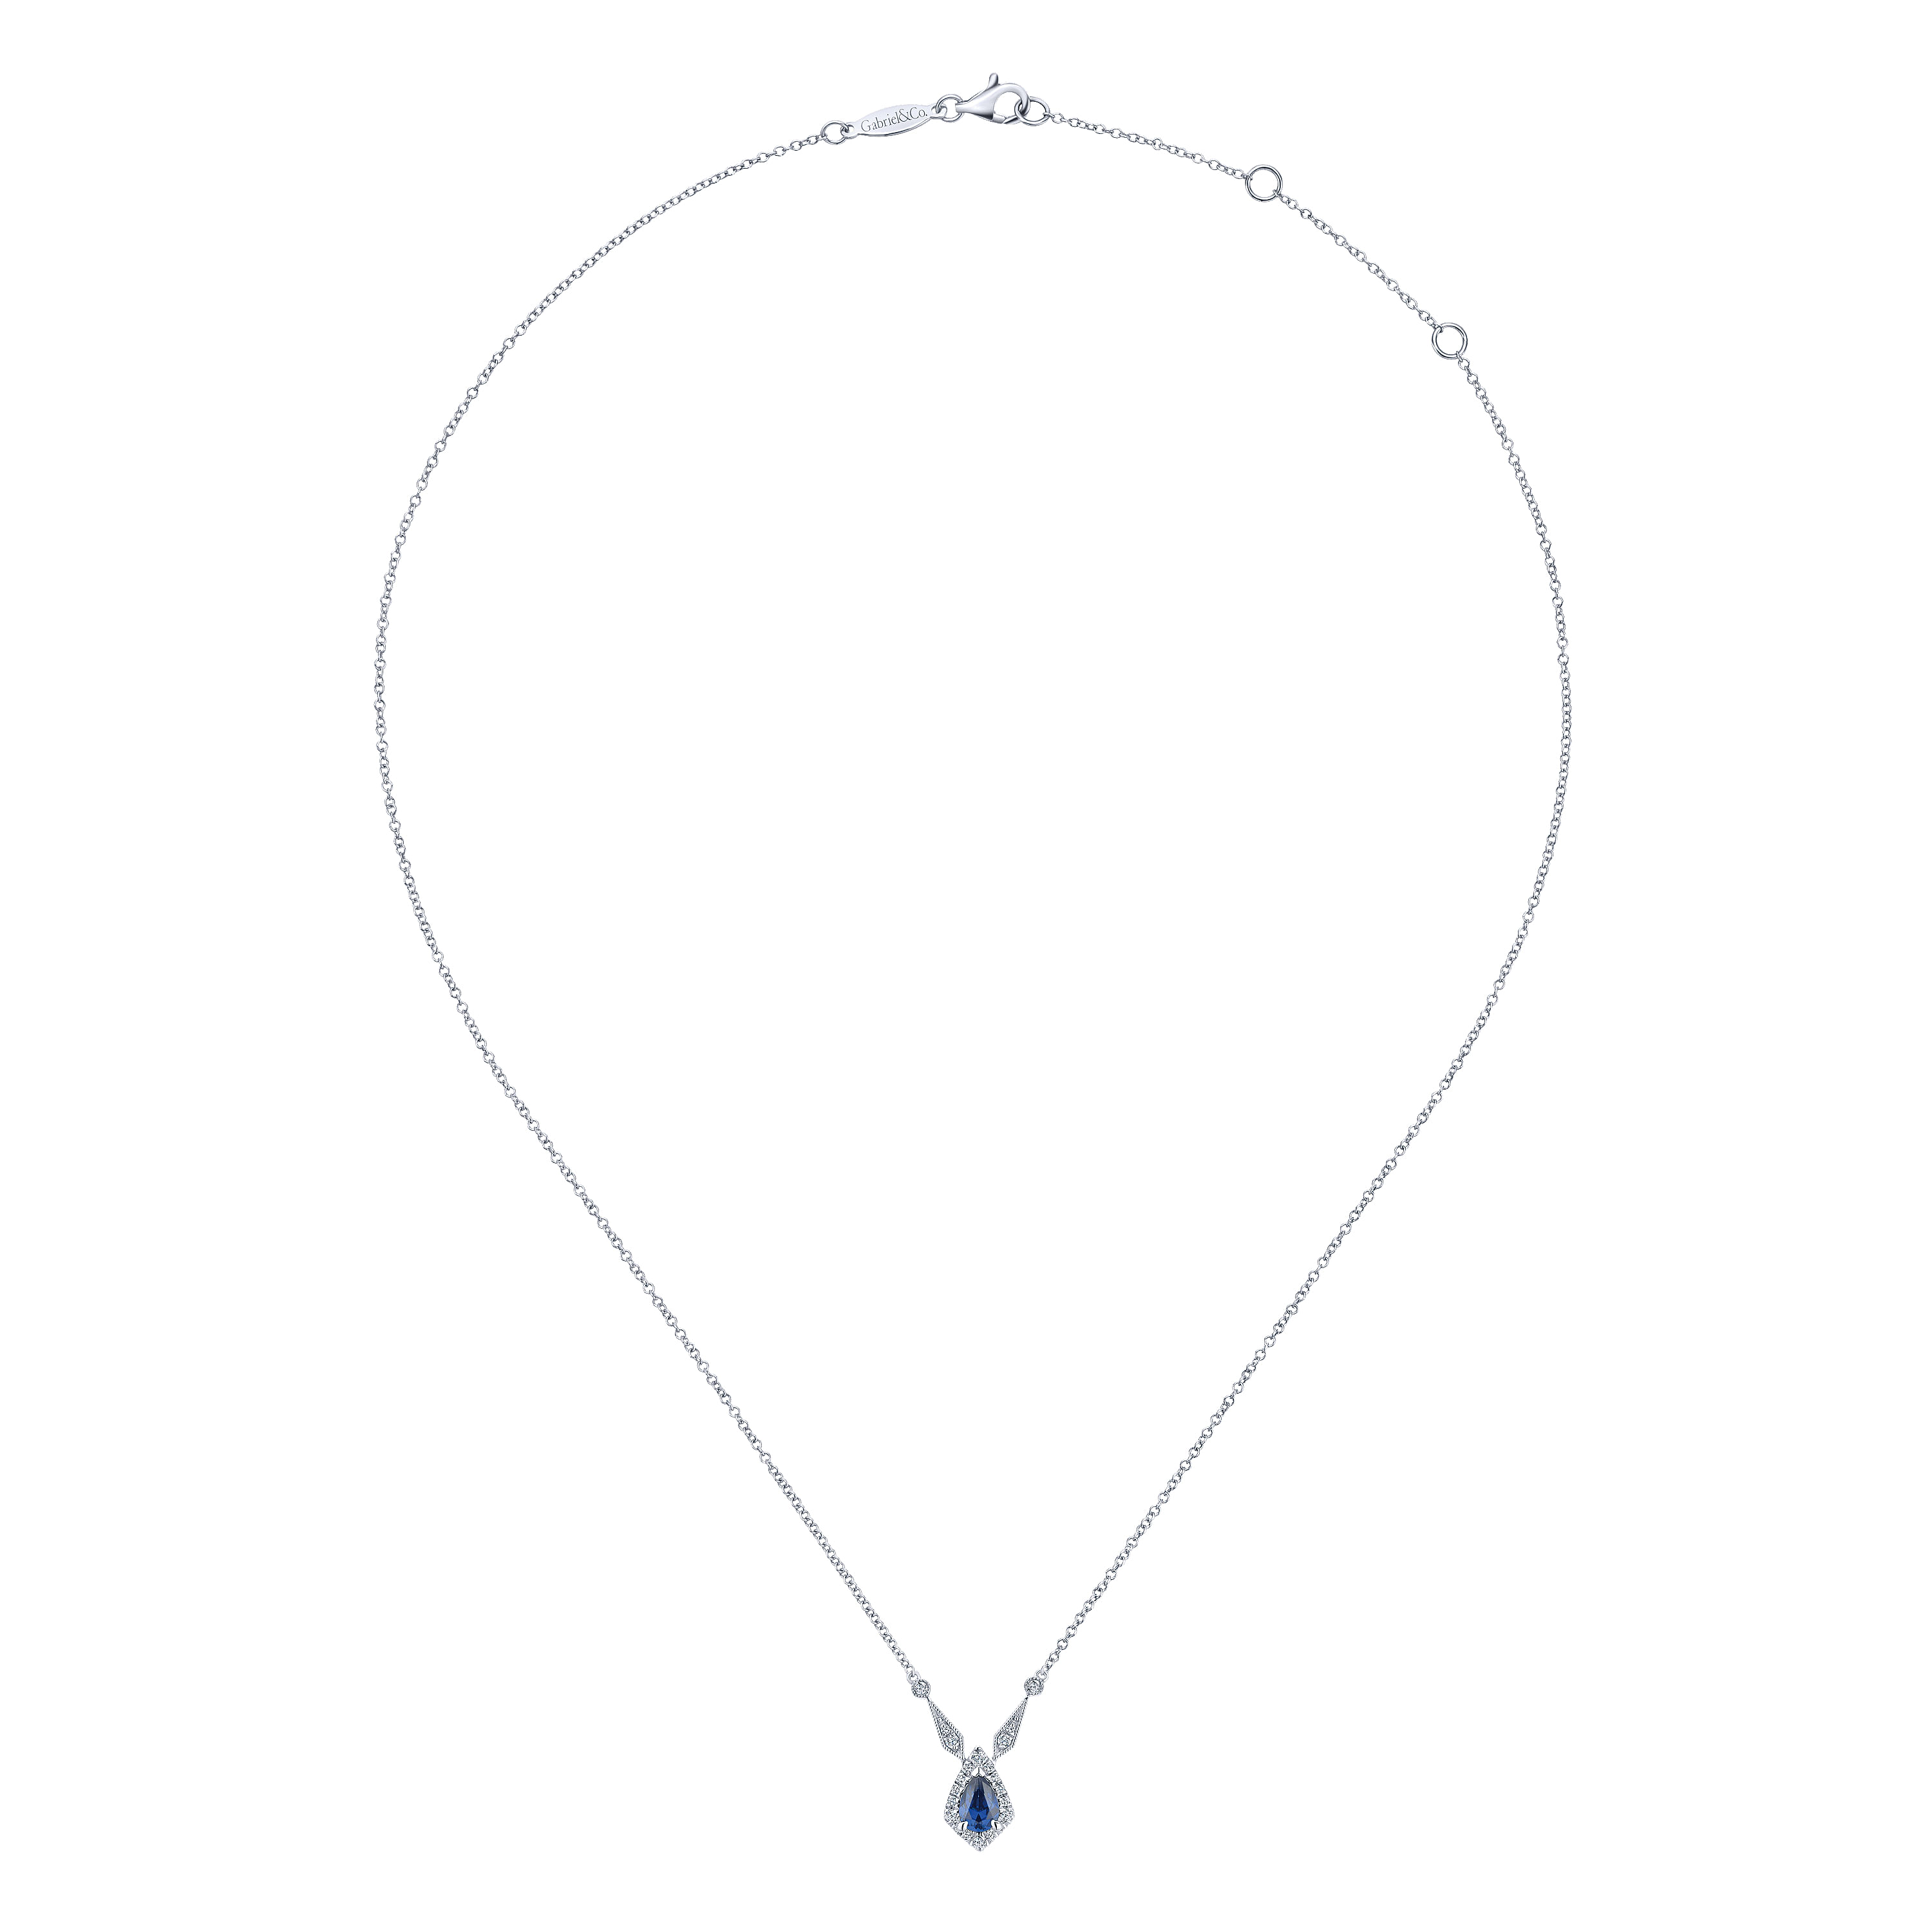 Vintage Inspired 14K White Gold Teardrop Sapphire and Diamond Halo Pendant Necklace